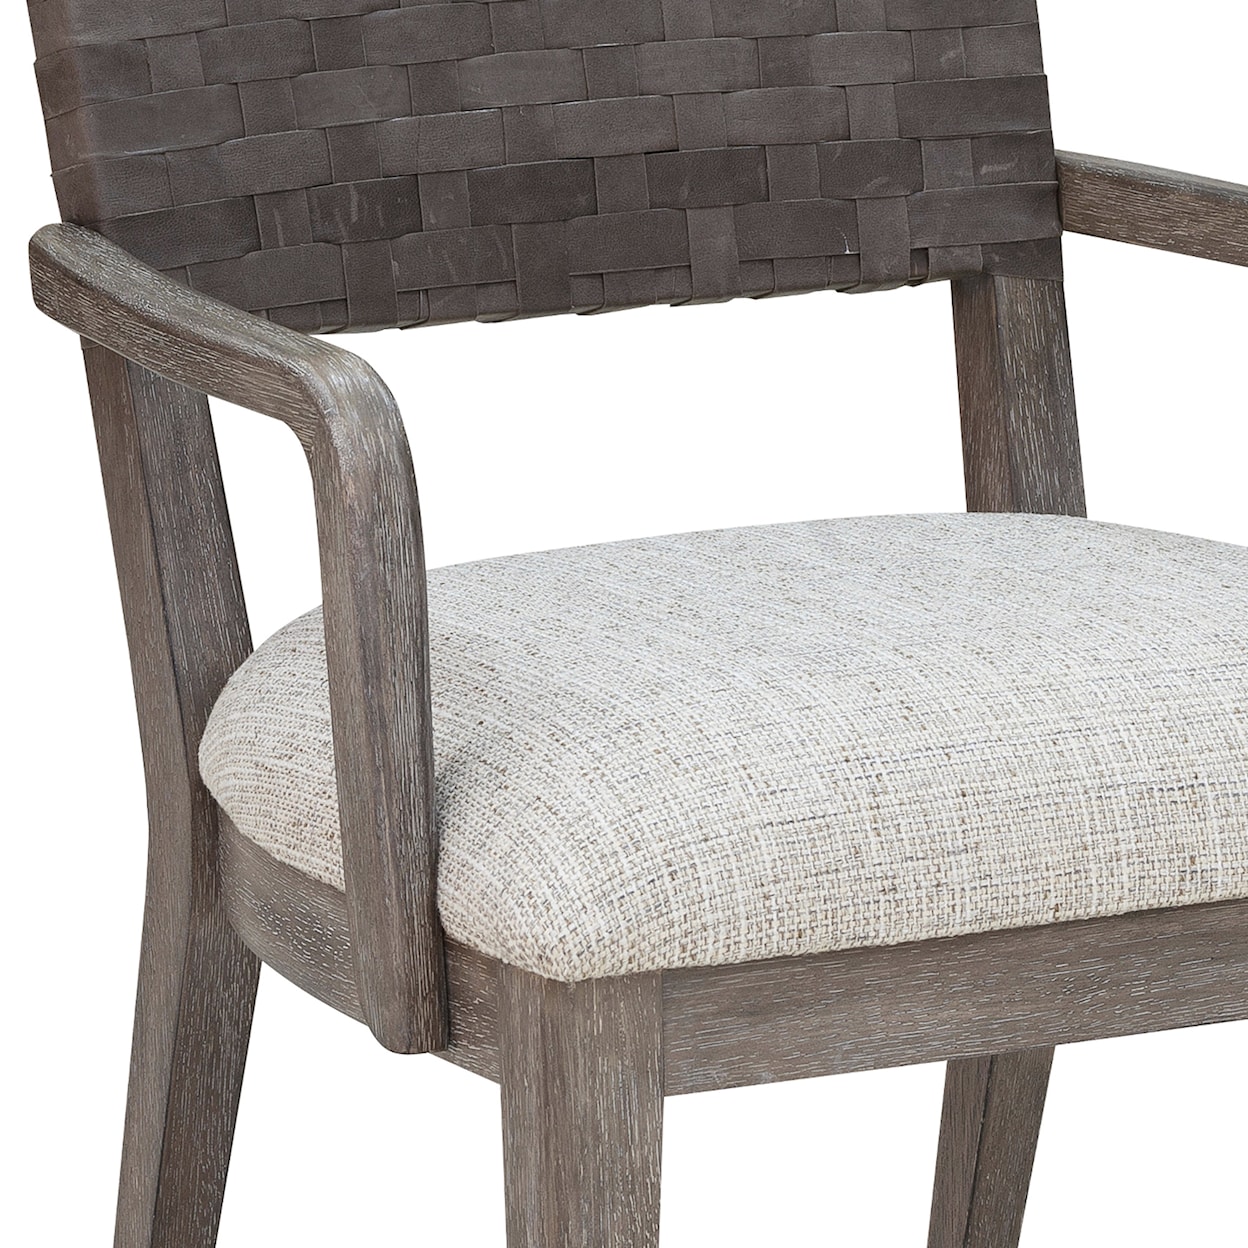 Drew & Jonathan Home Griffith Dining Arm Chair